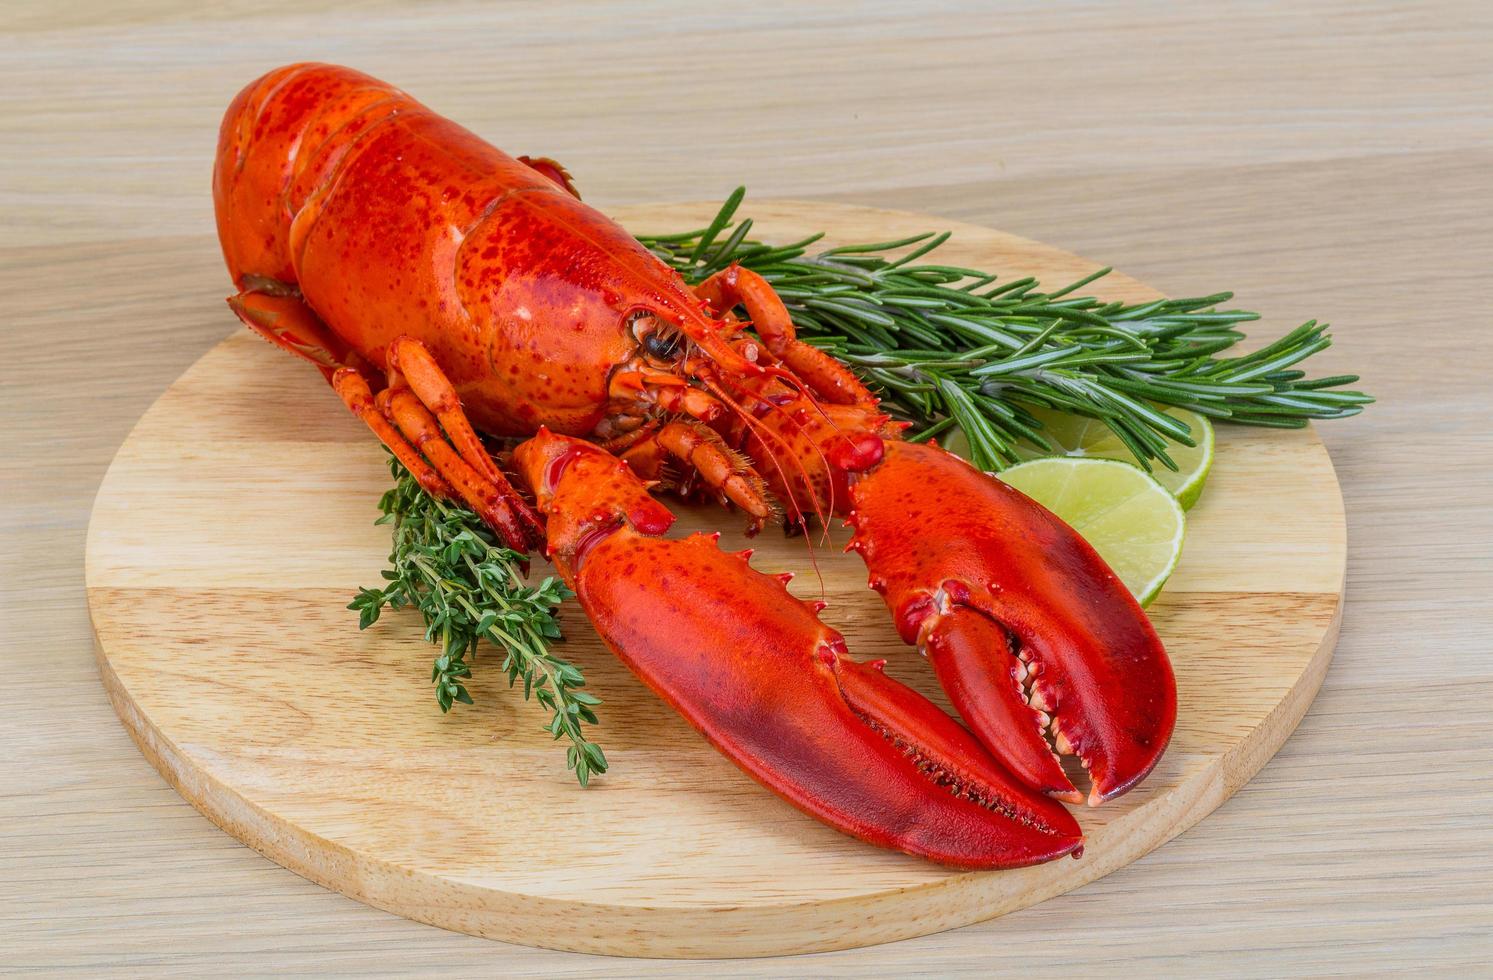 Boiled lobster on wooden board and wooden background photo